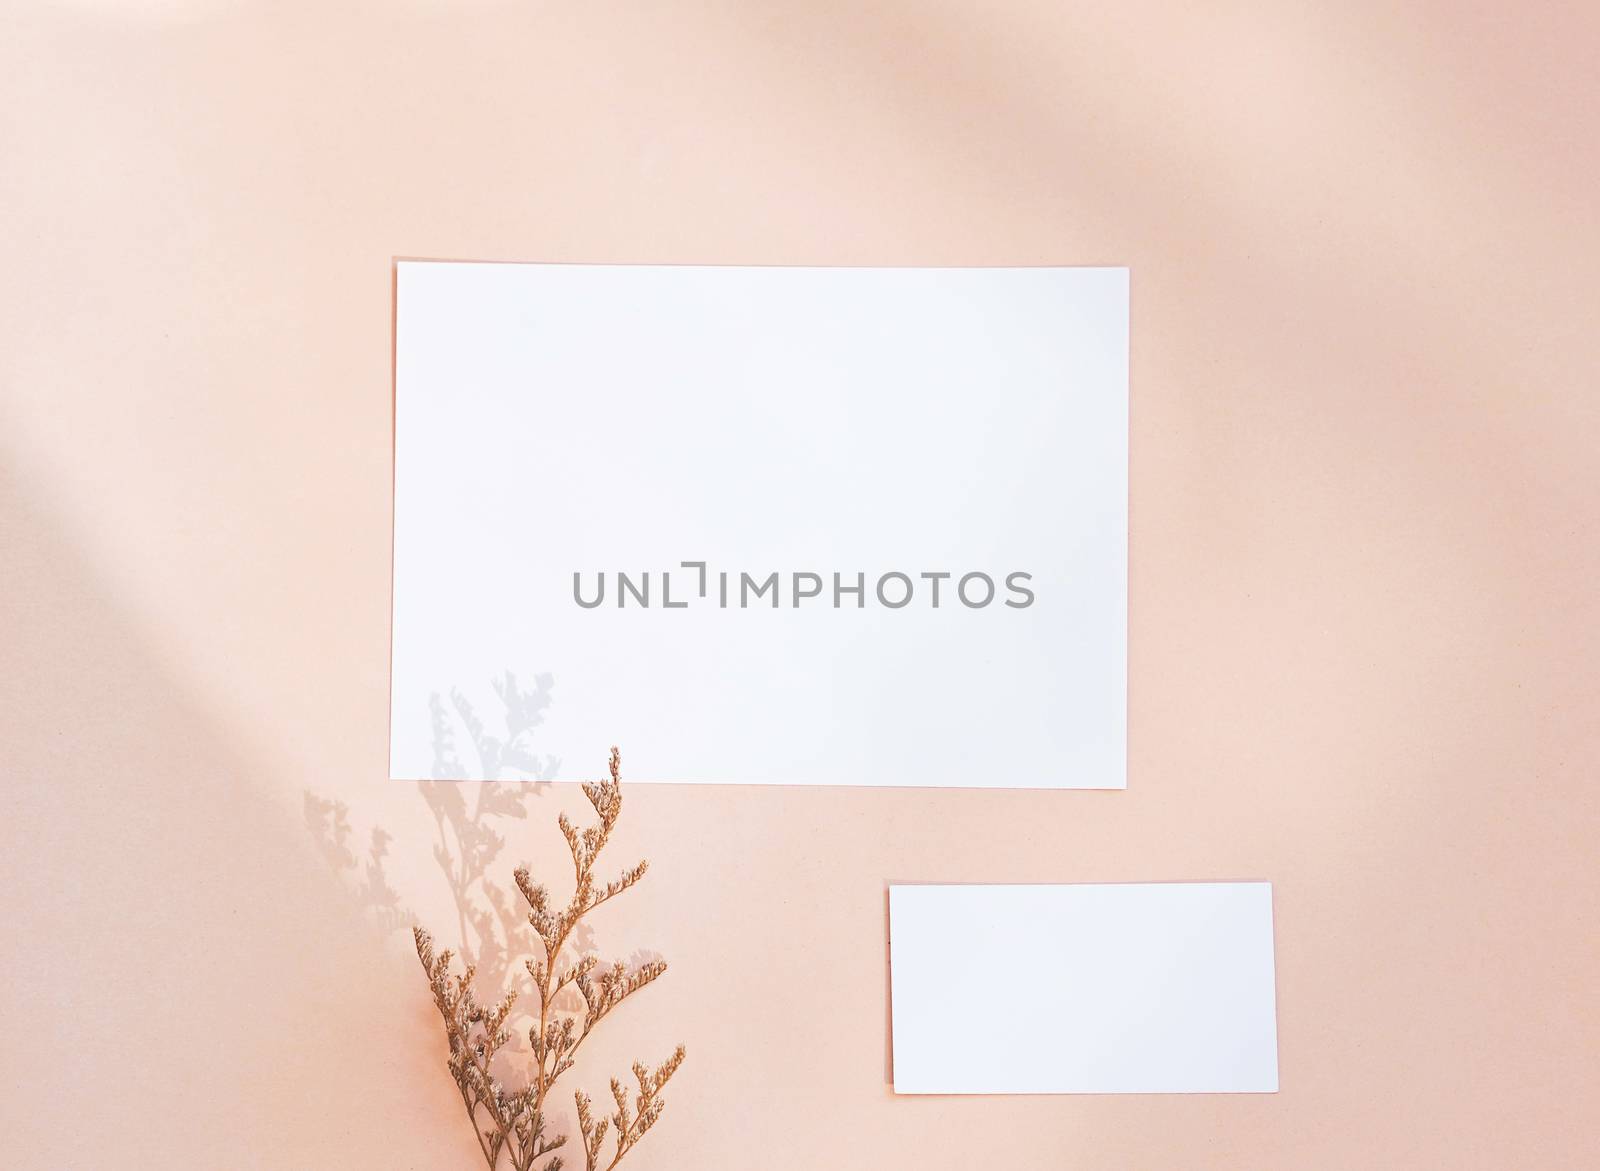 Flat lay of branding identity business name card on yellow background with flower, minimal light and shadow concept for design